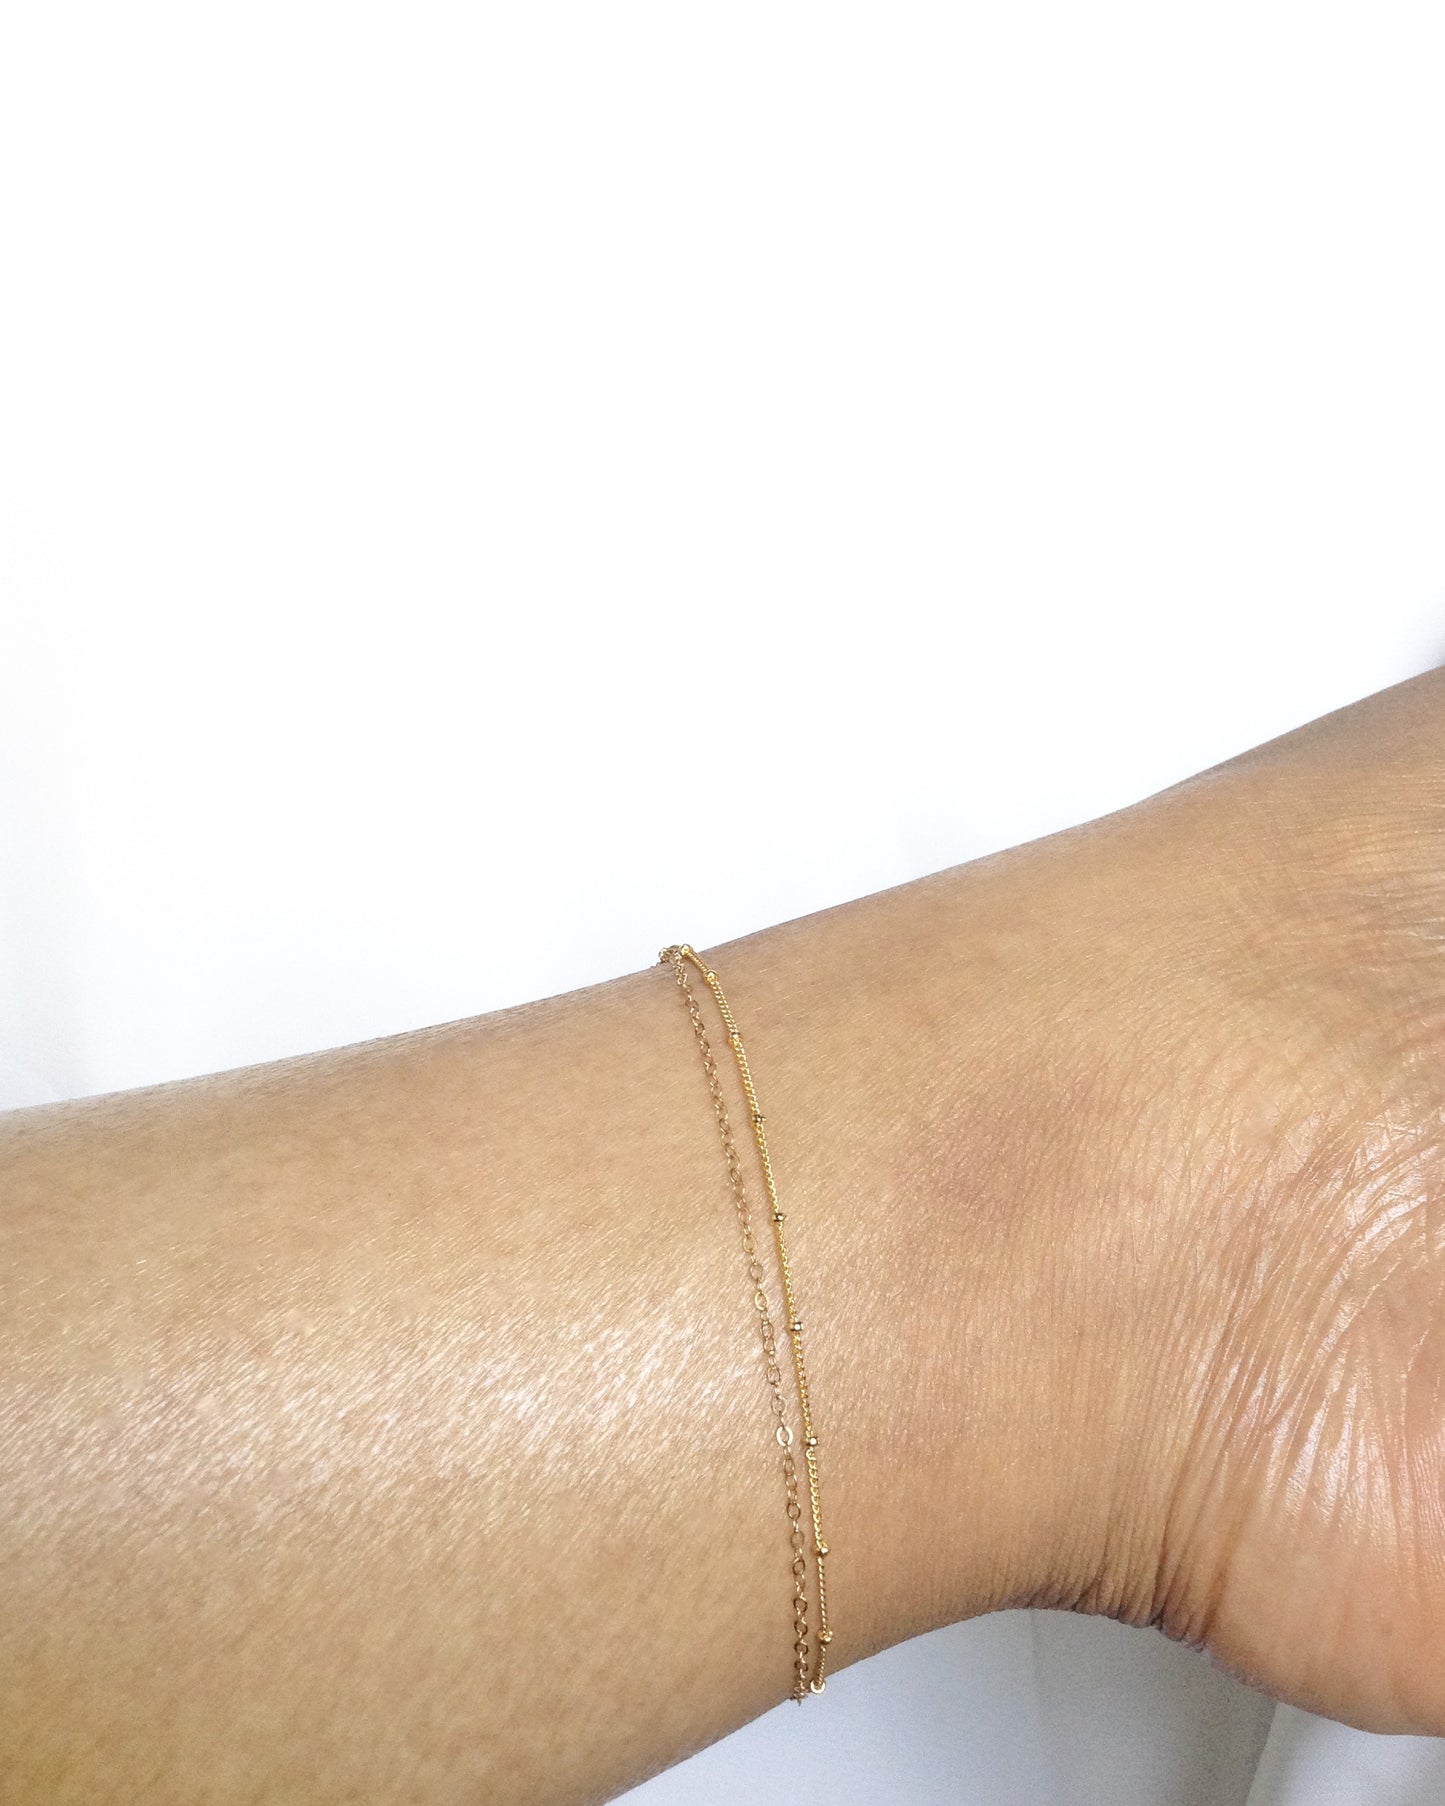 Dainty Minimalist Anklet | Dainty Ankle Bracelet | Thin Chain Simple Delicate Anklet | IB Jewelry